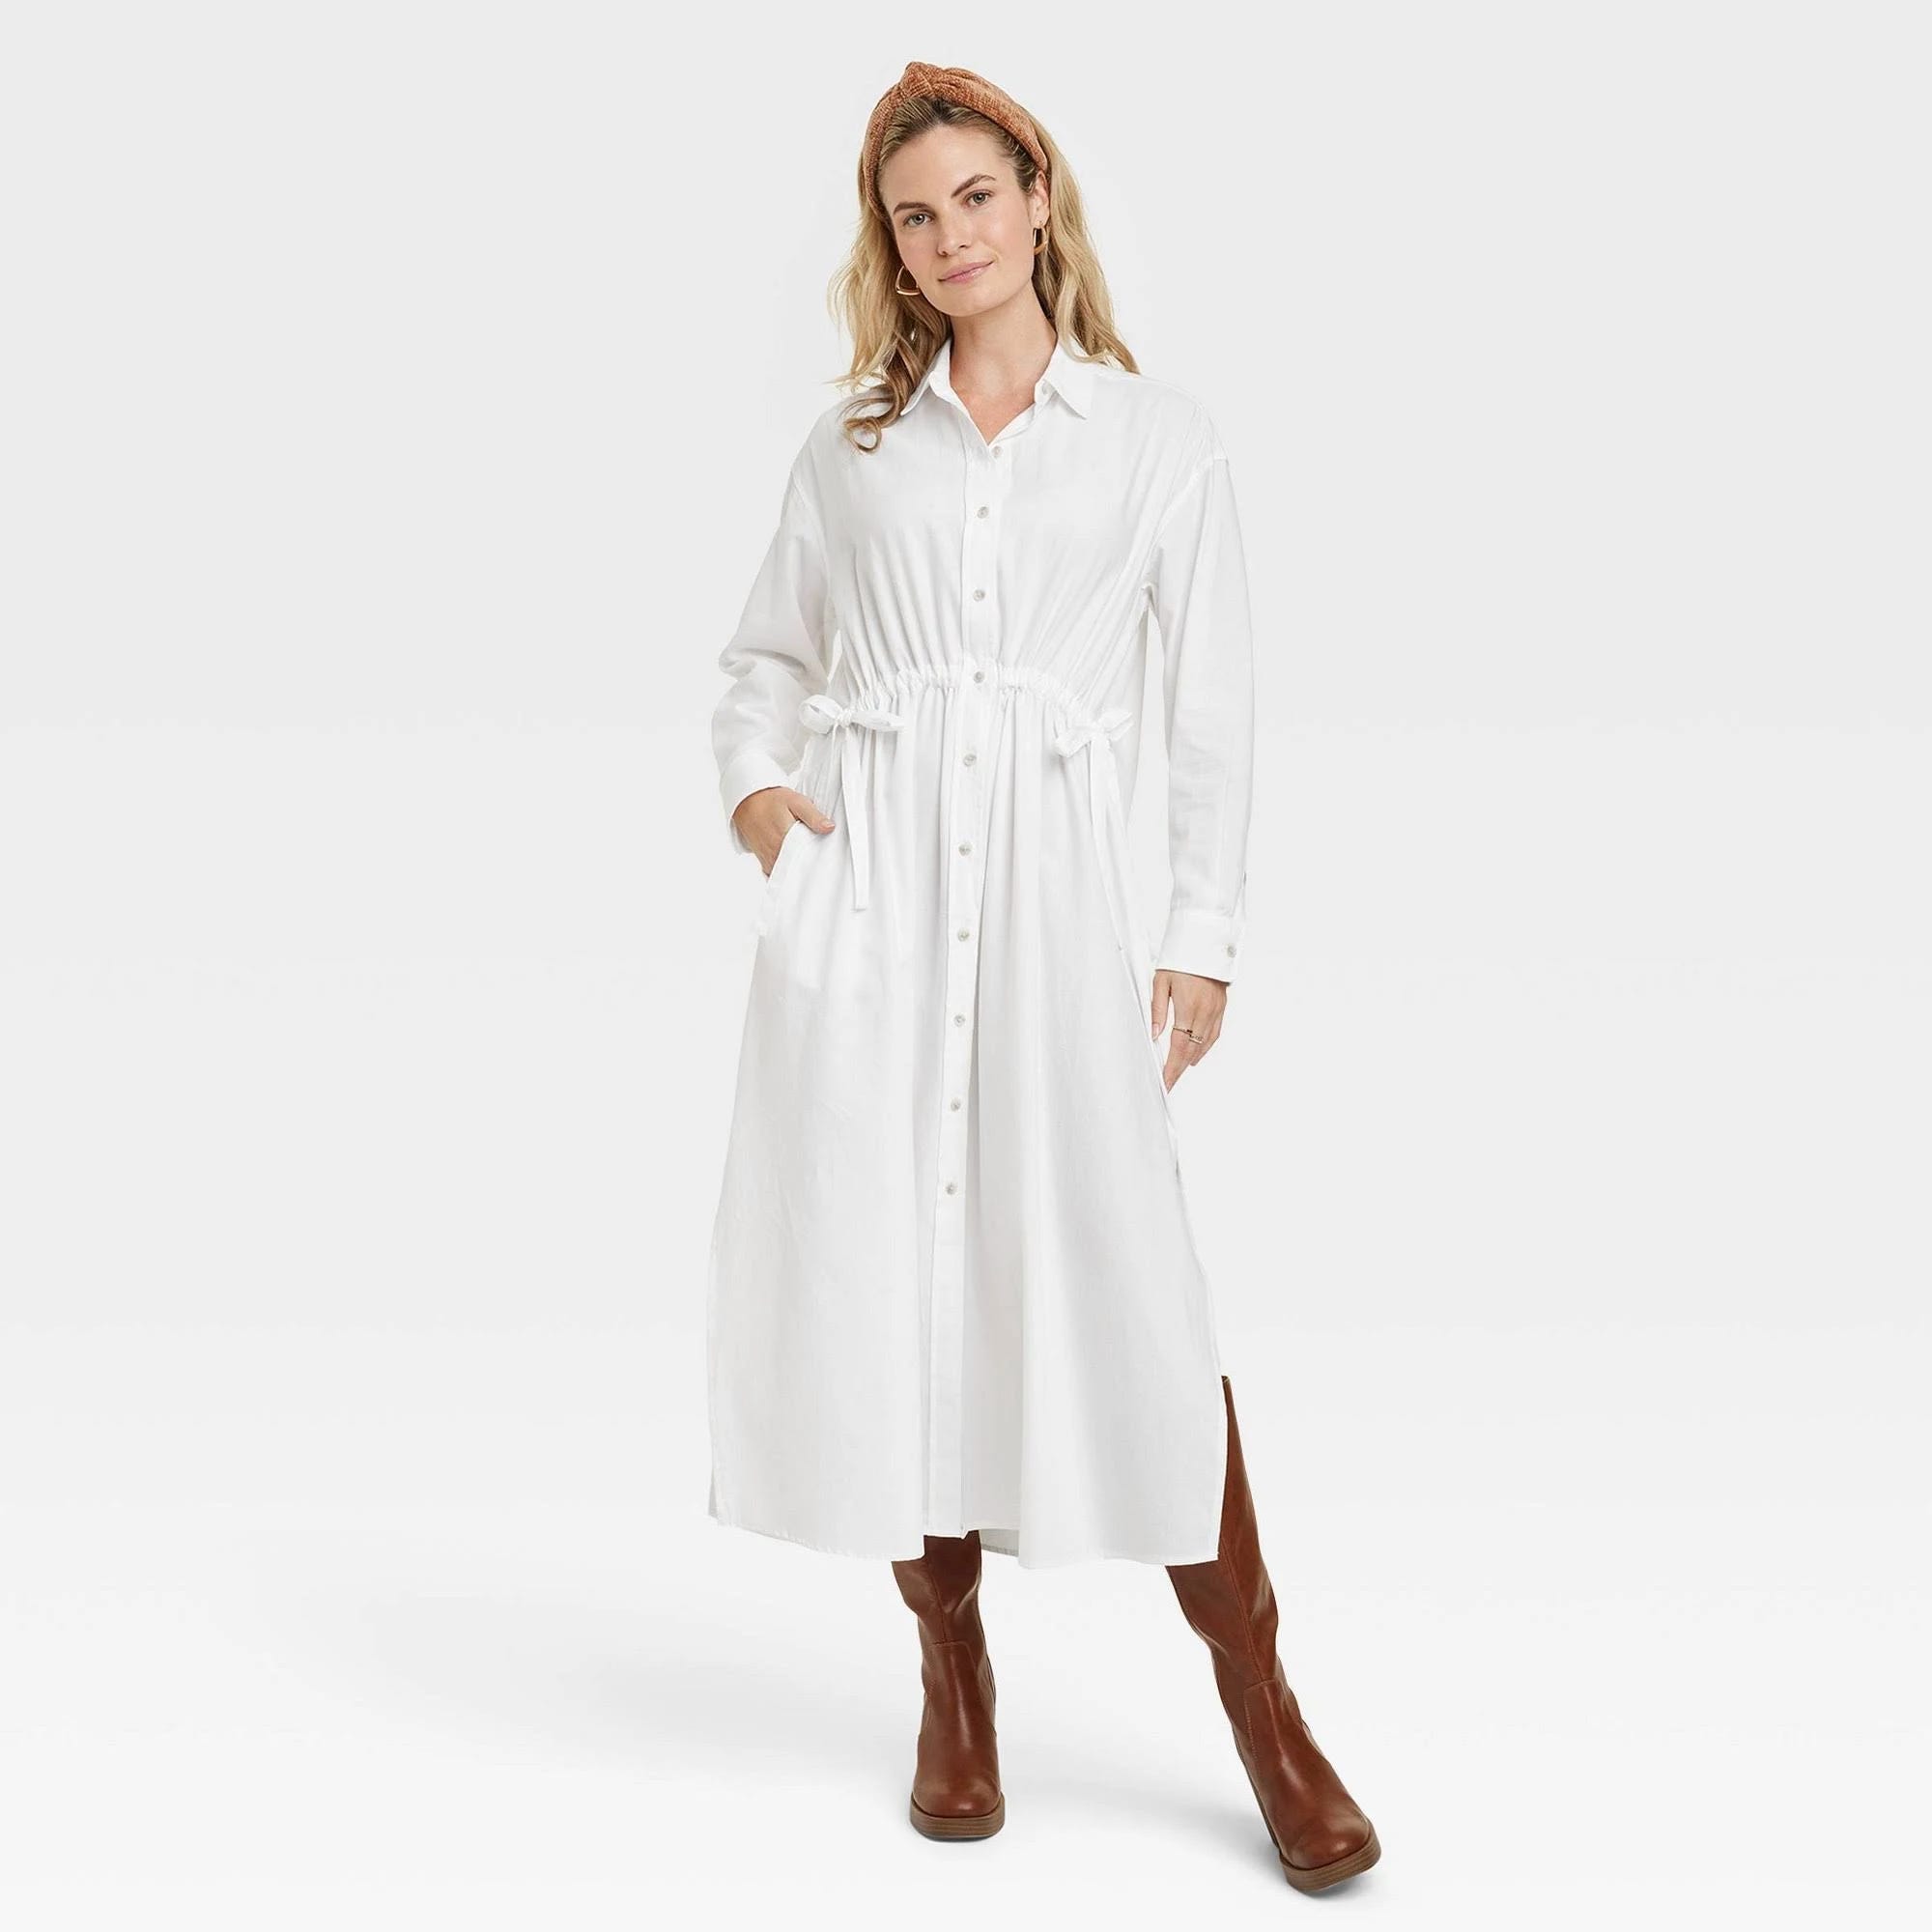 Classic Long Sleeve Maxi Shirtdress for Everyday Wear | Image